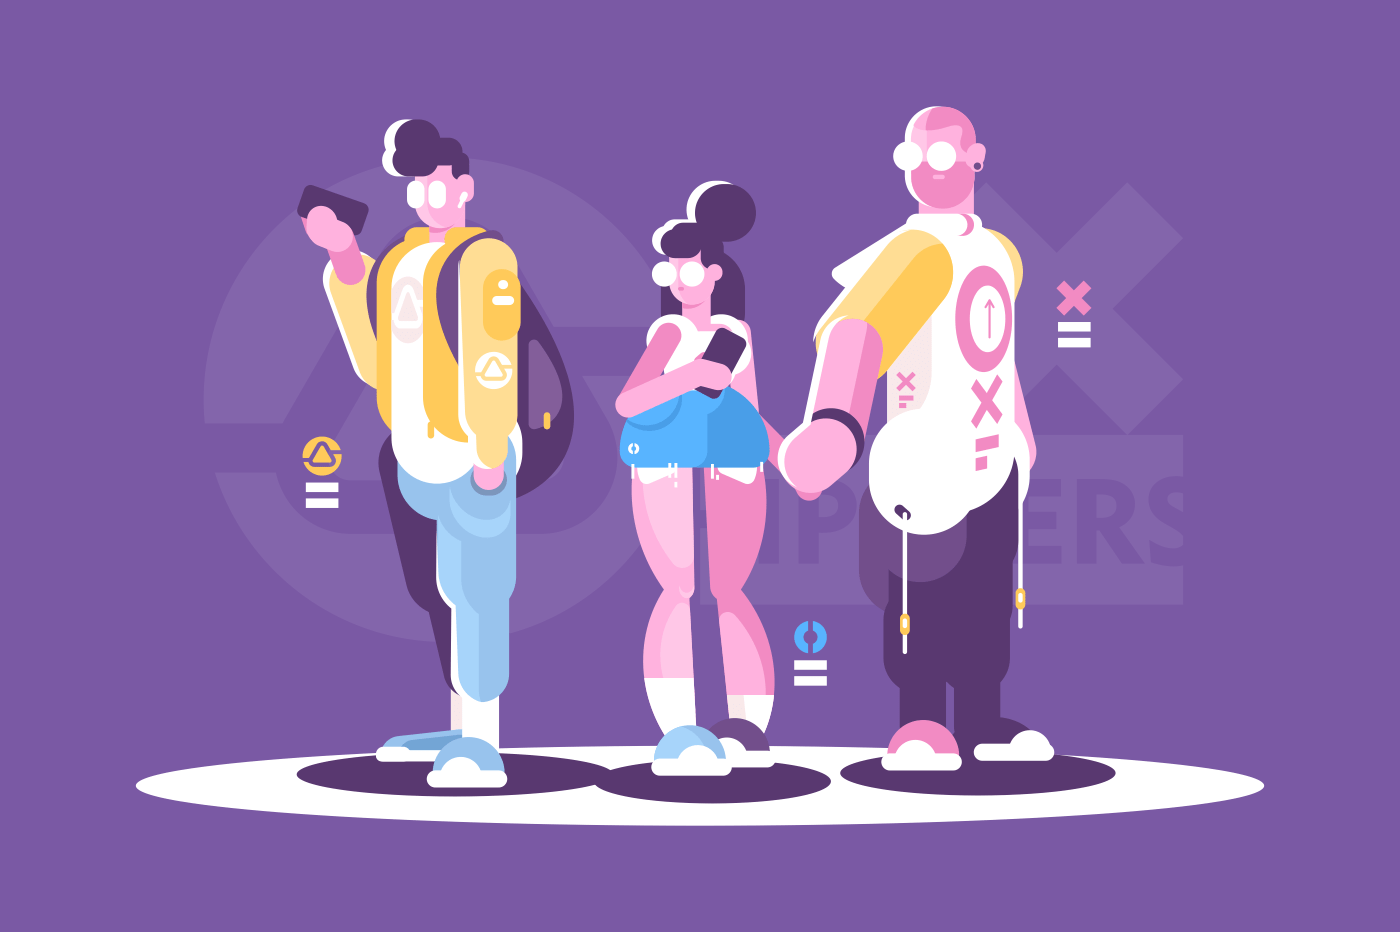 People hipster fashion style standing together. Fashionable men woman dressed in trendy clothes. Flat. Vector illustration.